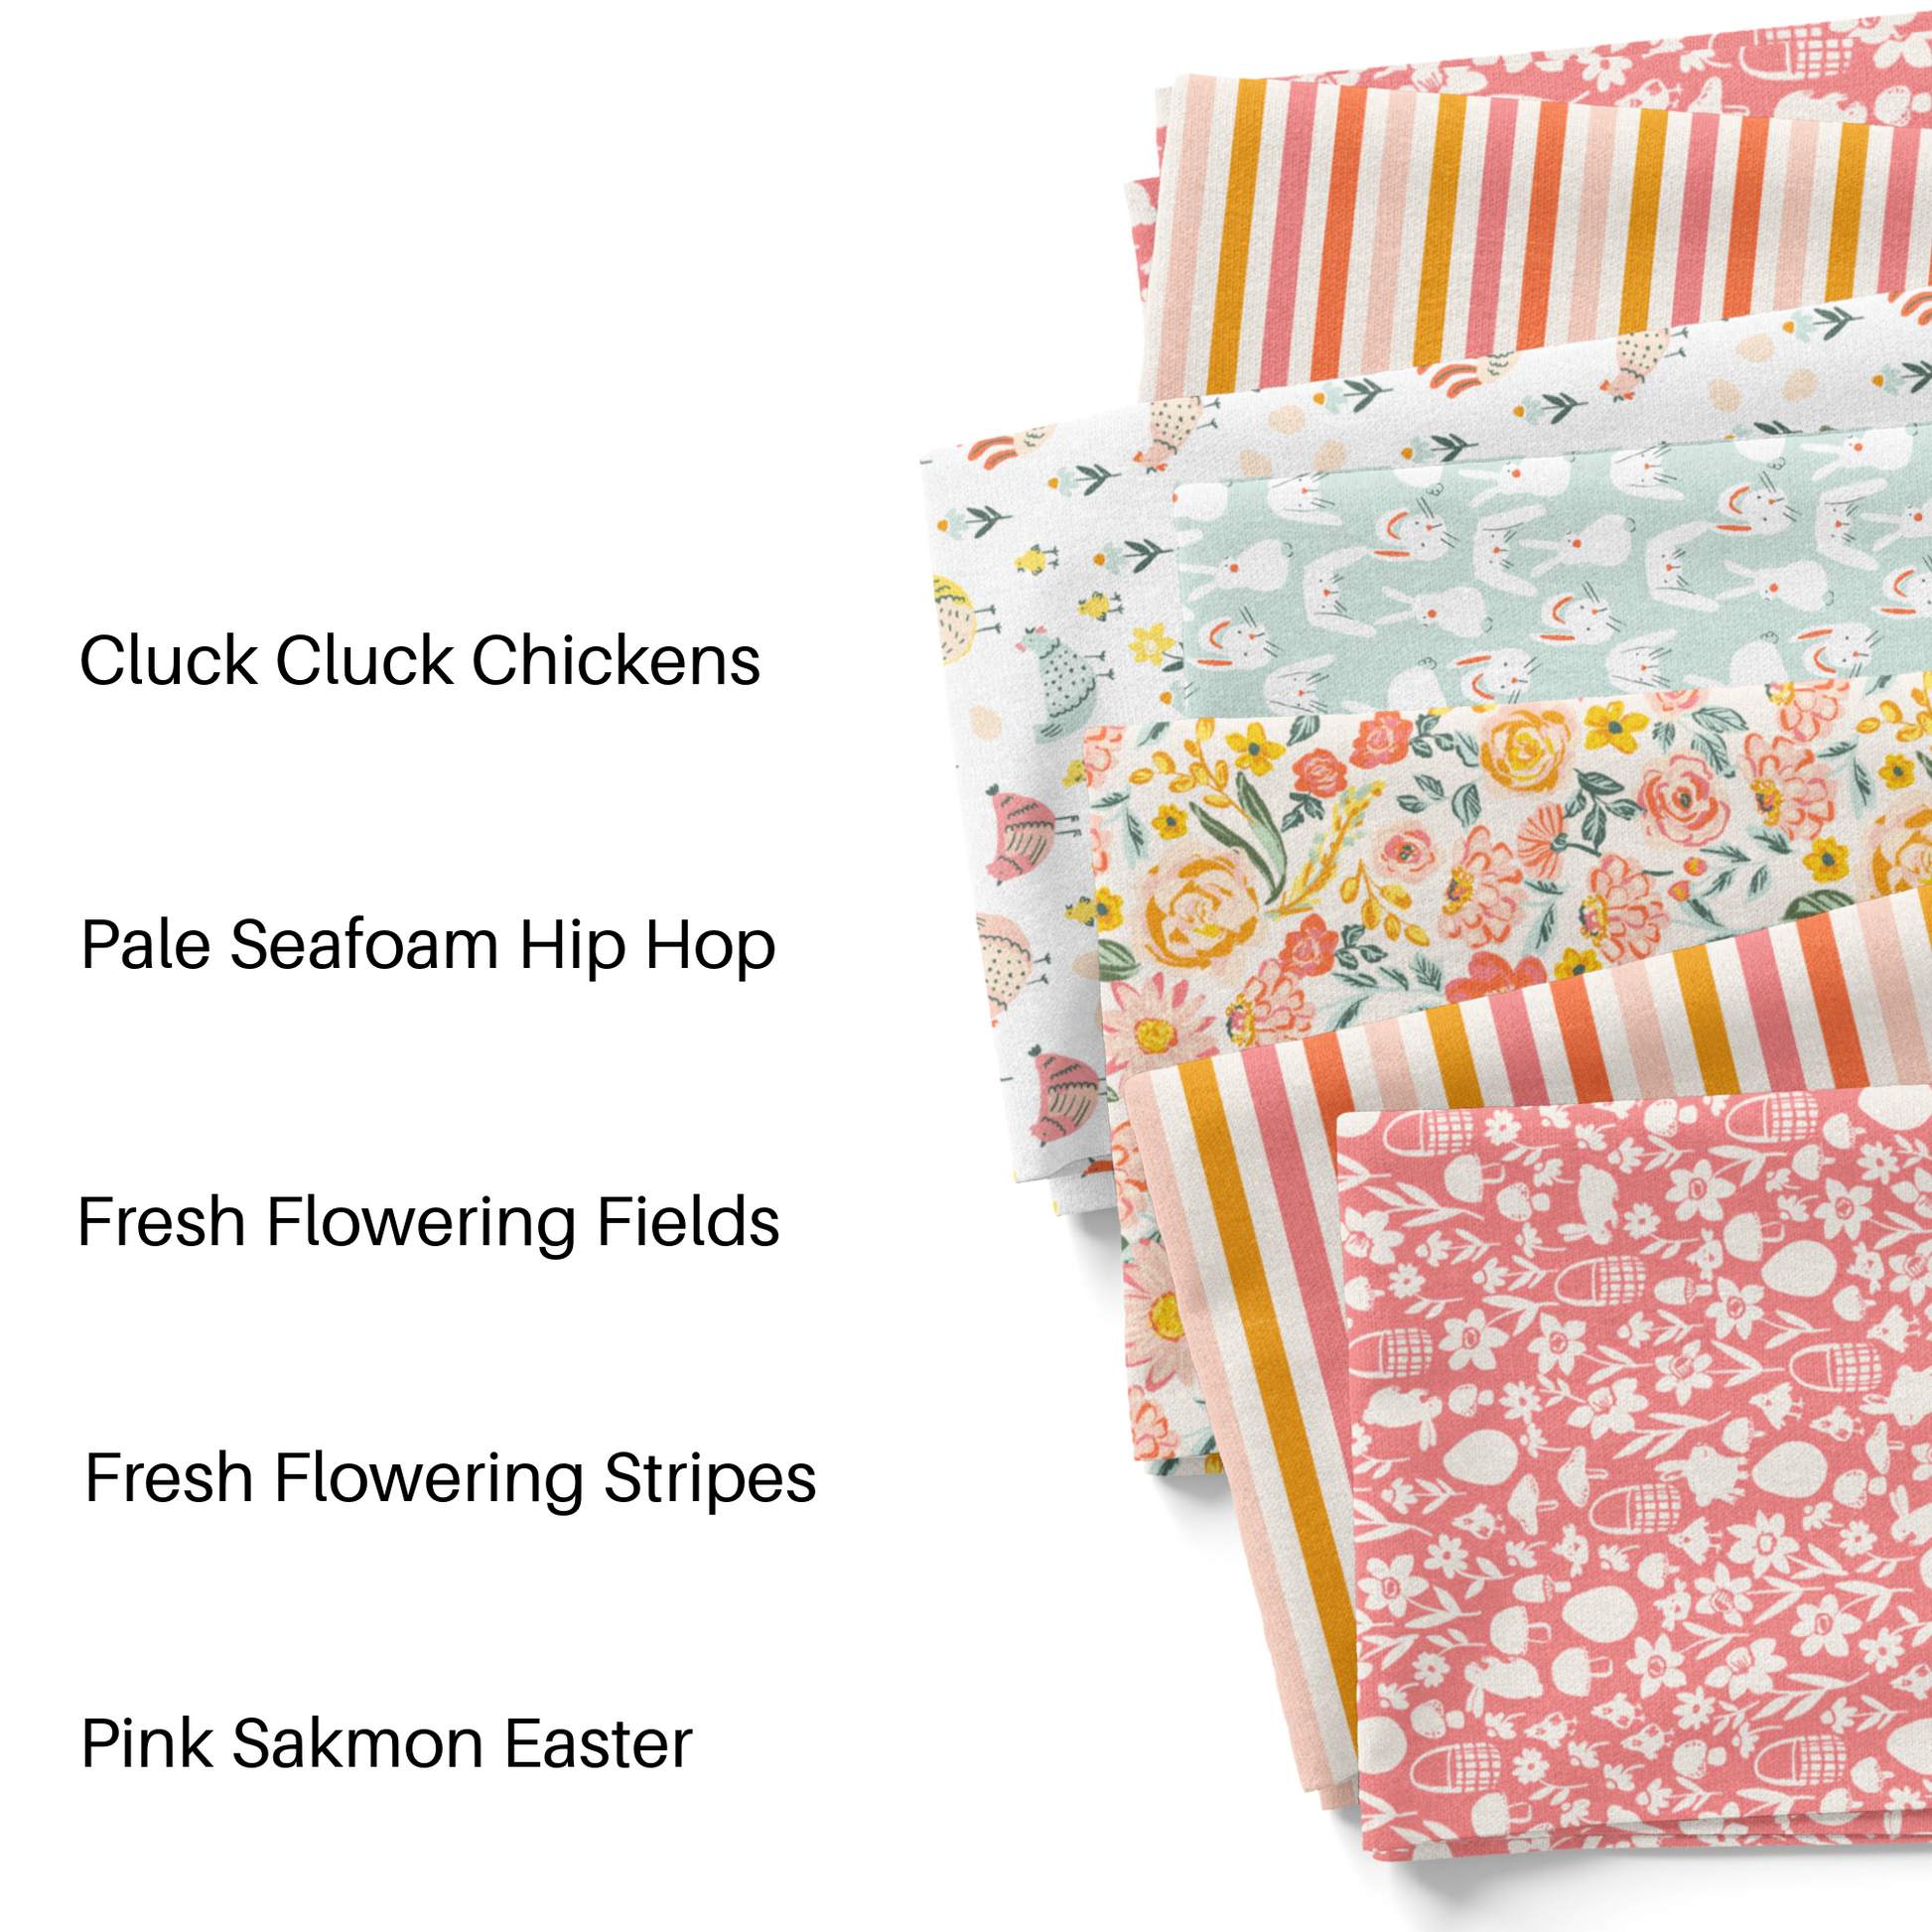 Indy Bloom Easter floral fabric by the yard swatches.